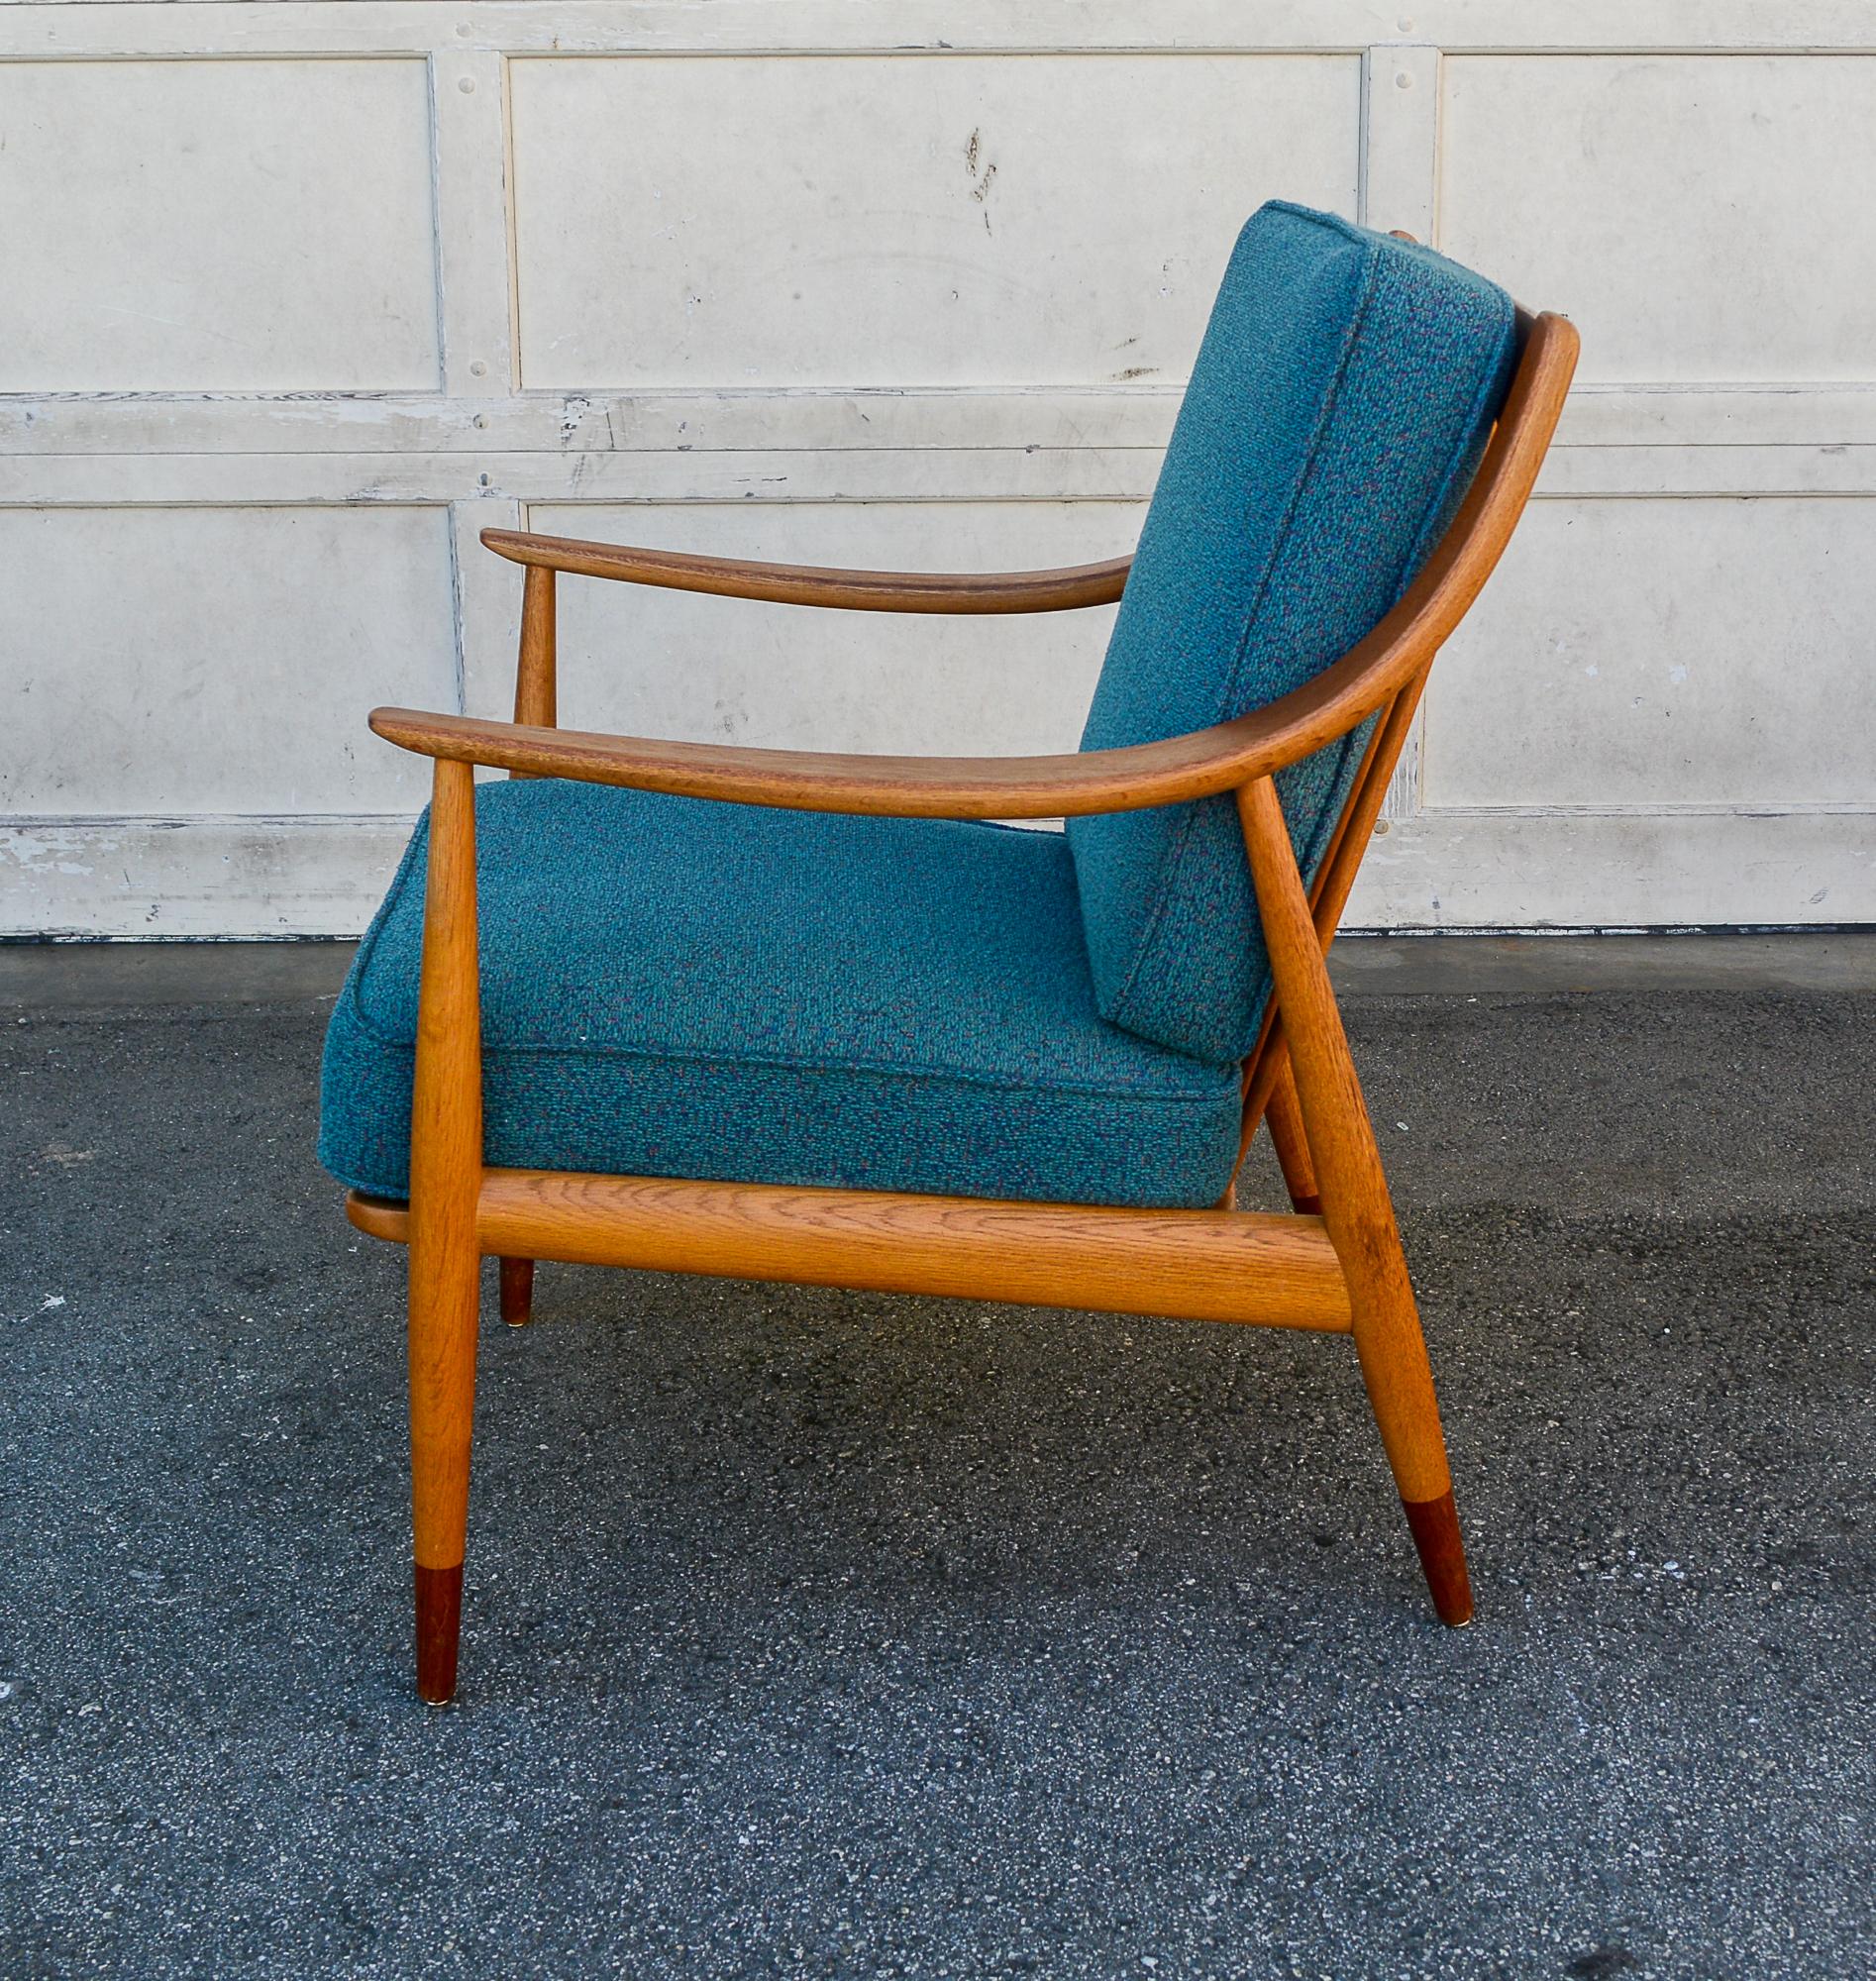 Lounge chair designed by Peter Hvidt and Orla Molgaard-Nielsen. This chair was made by France and Daverkosen of Denmark and retailed by John Stuart in the United States. This is the more desirable version of this chair with an oak frame and teak